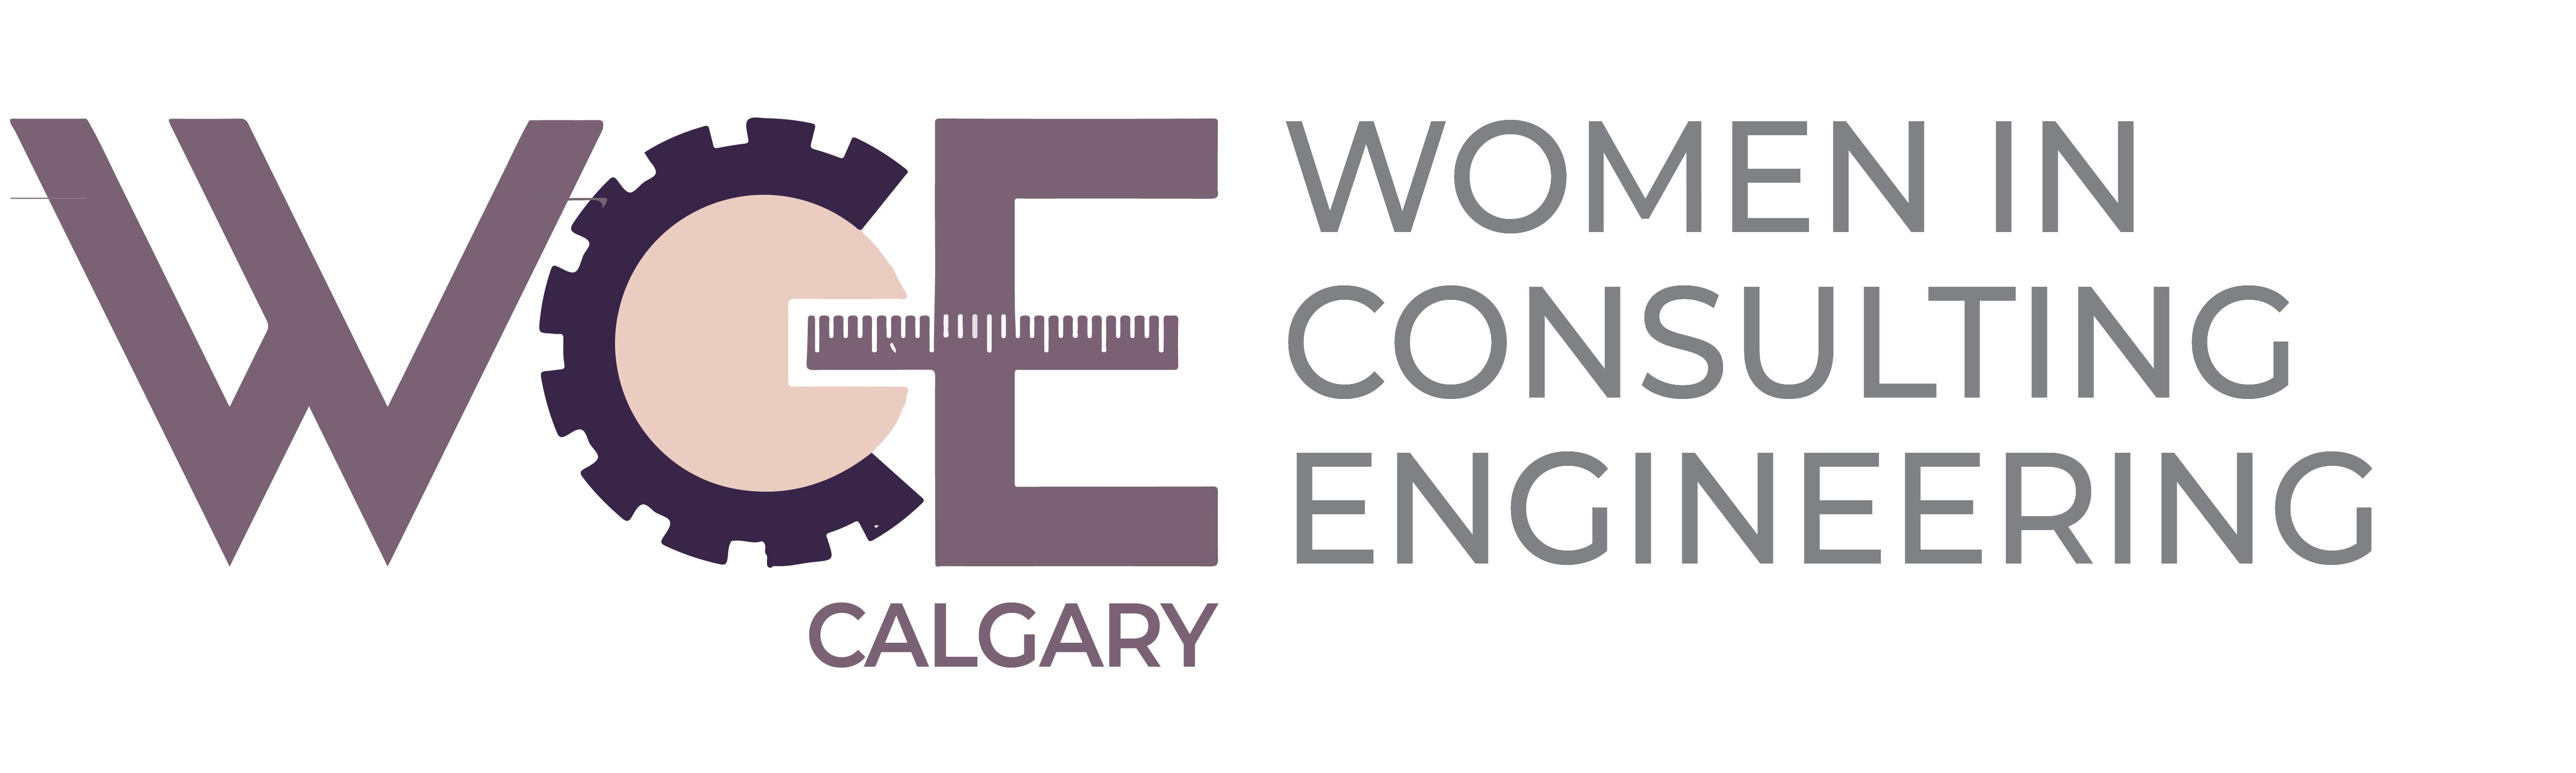 Women in Consulting Engineering